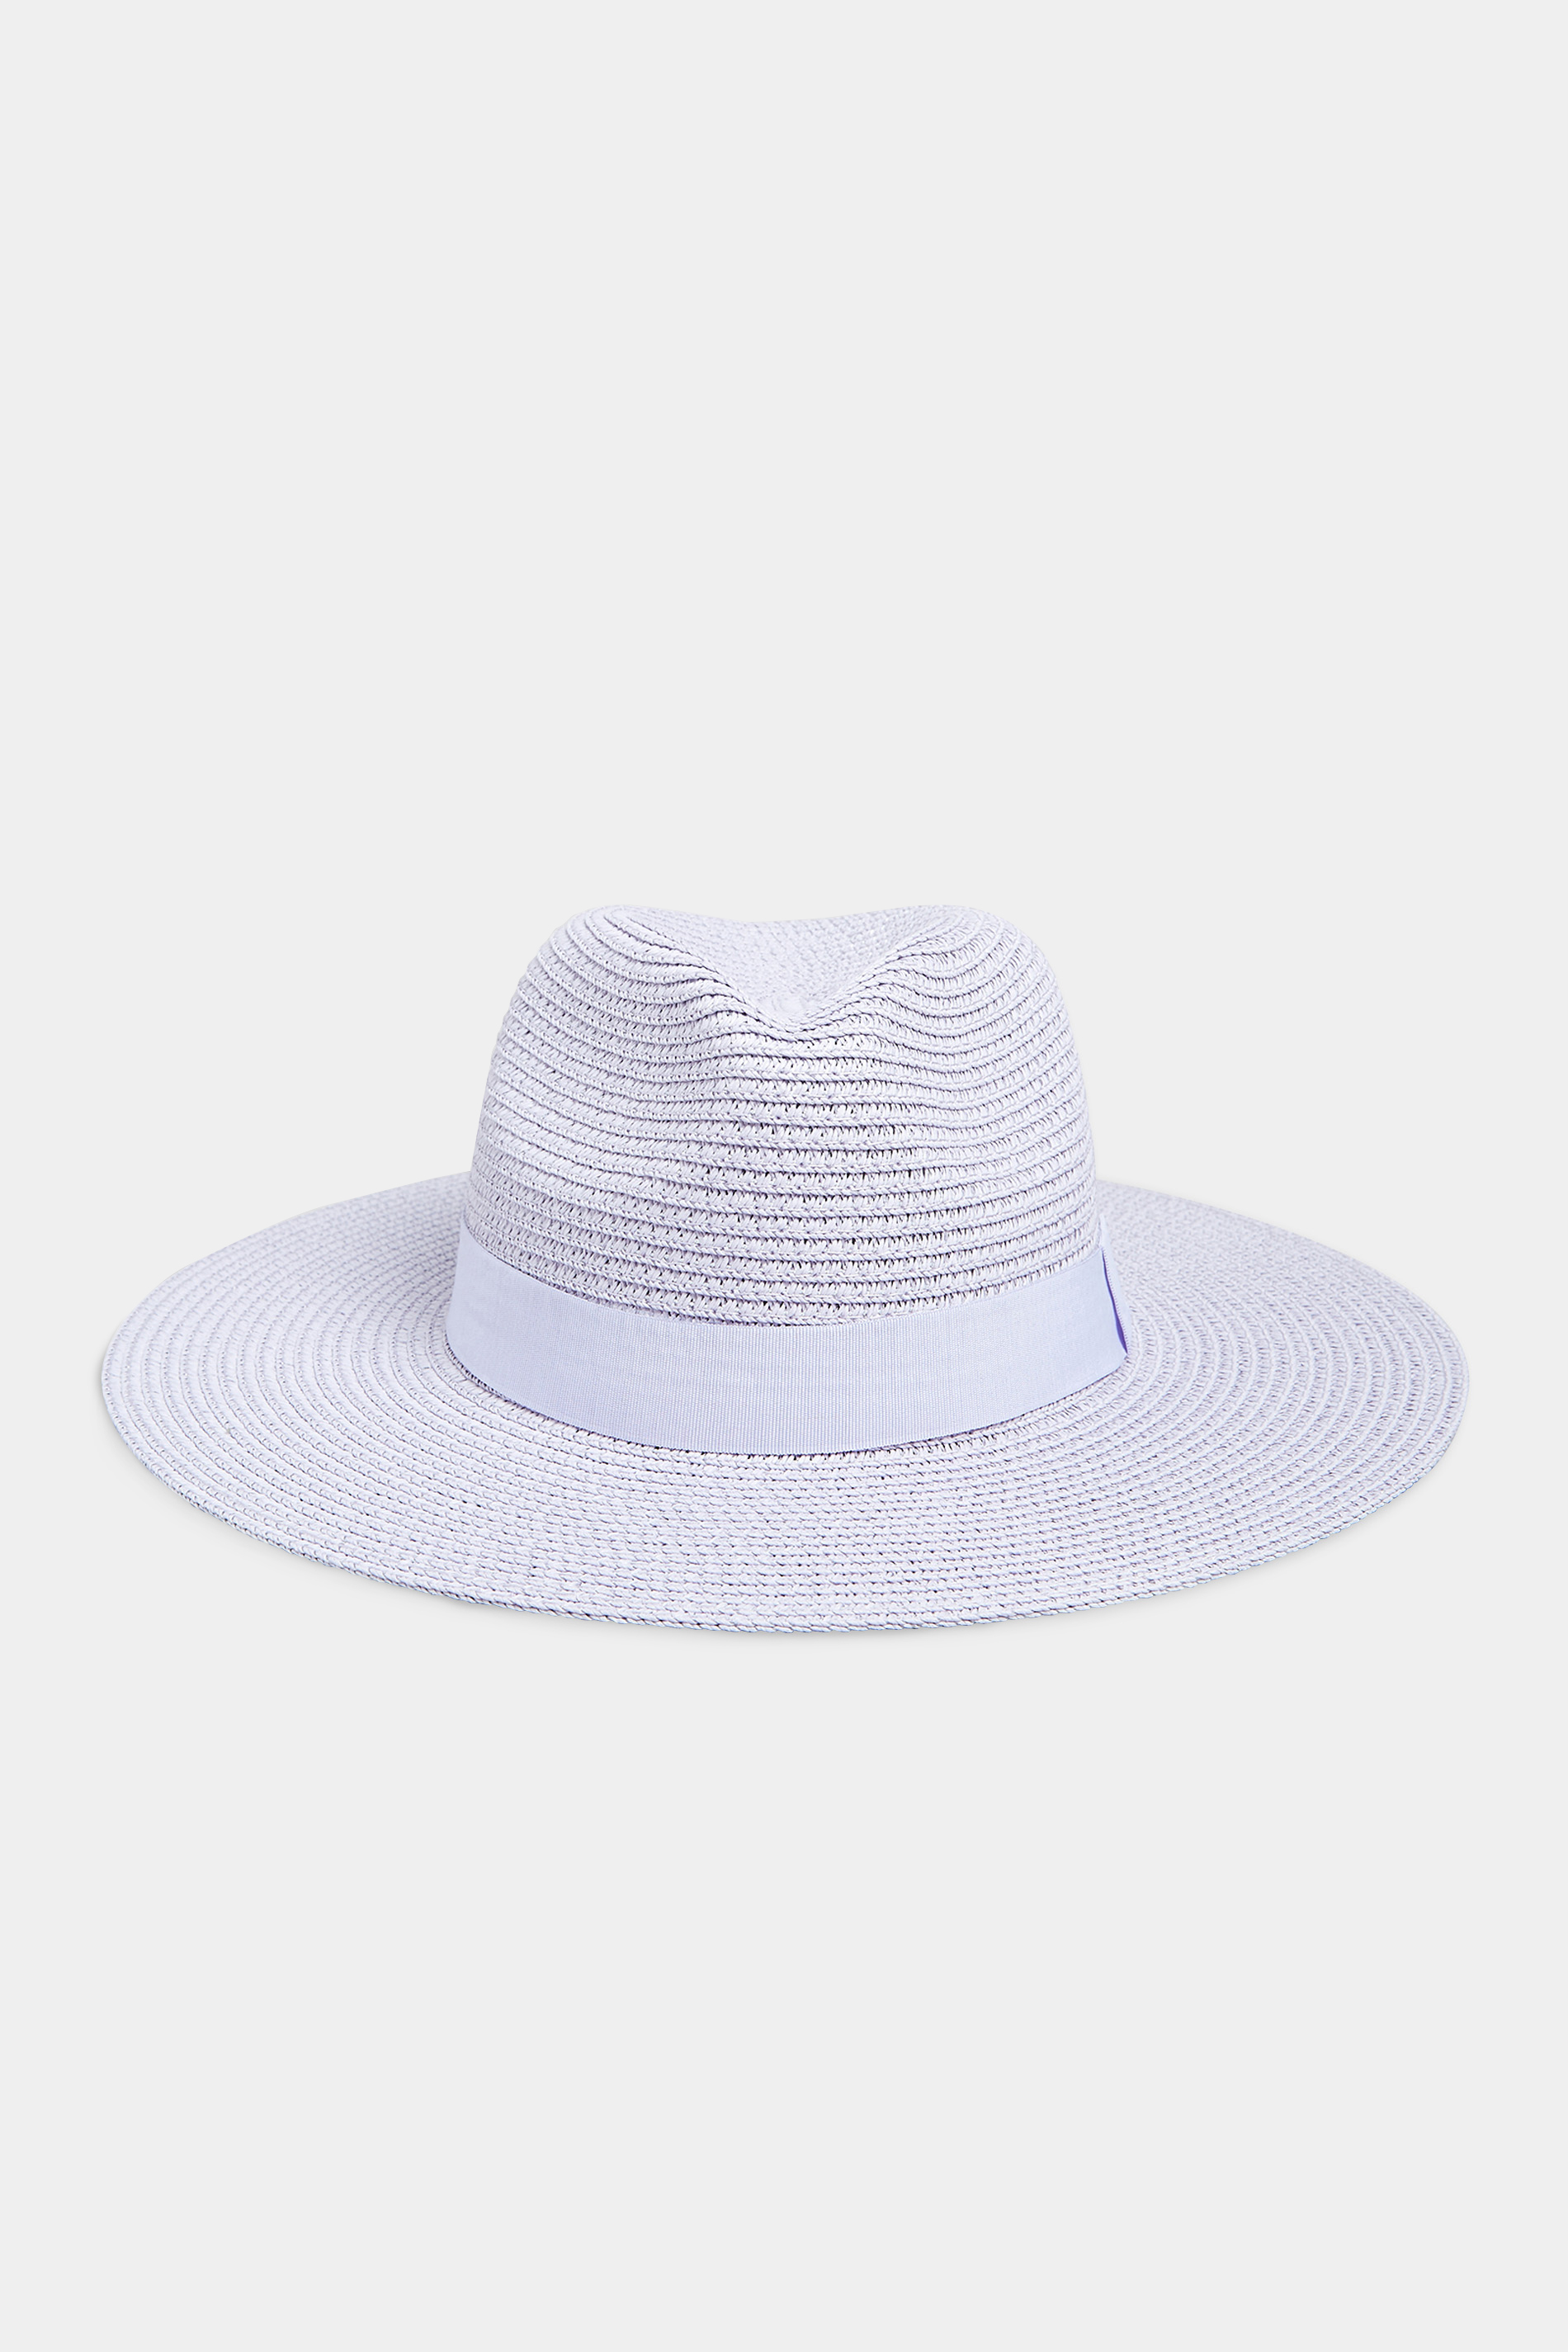 Hot Pink Straw Fedora Hat | Yours Clothing  2